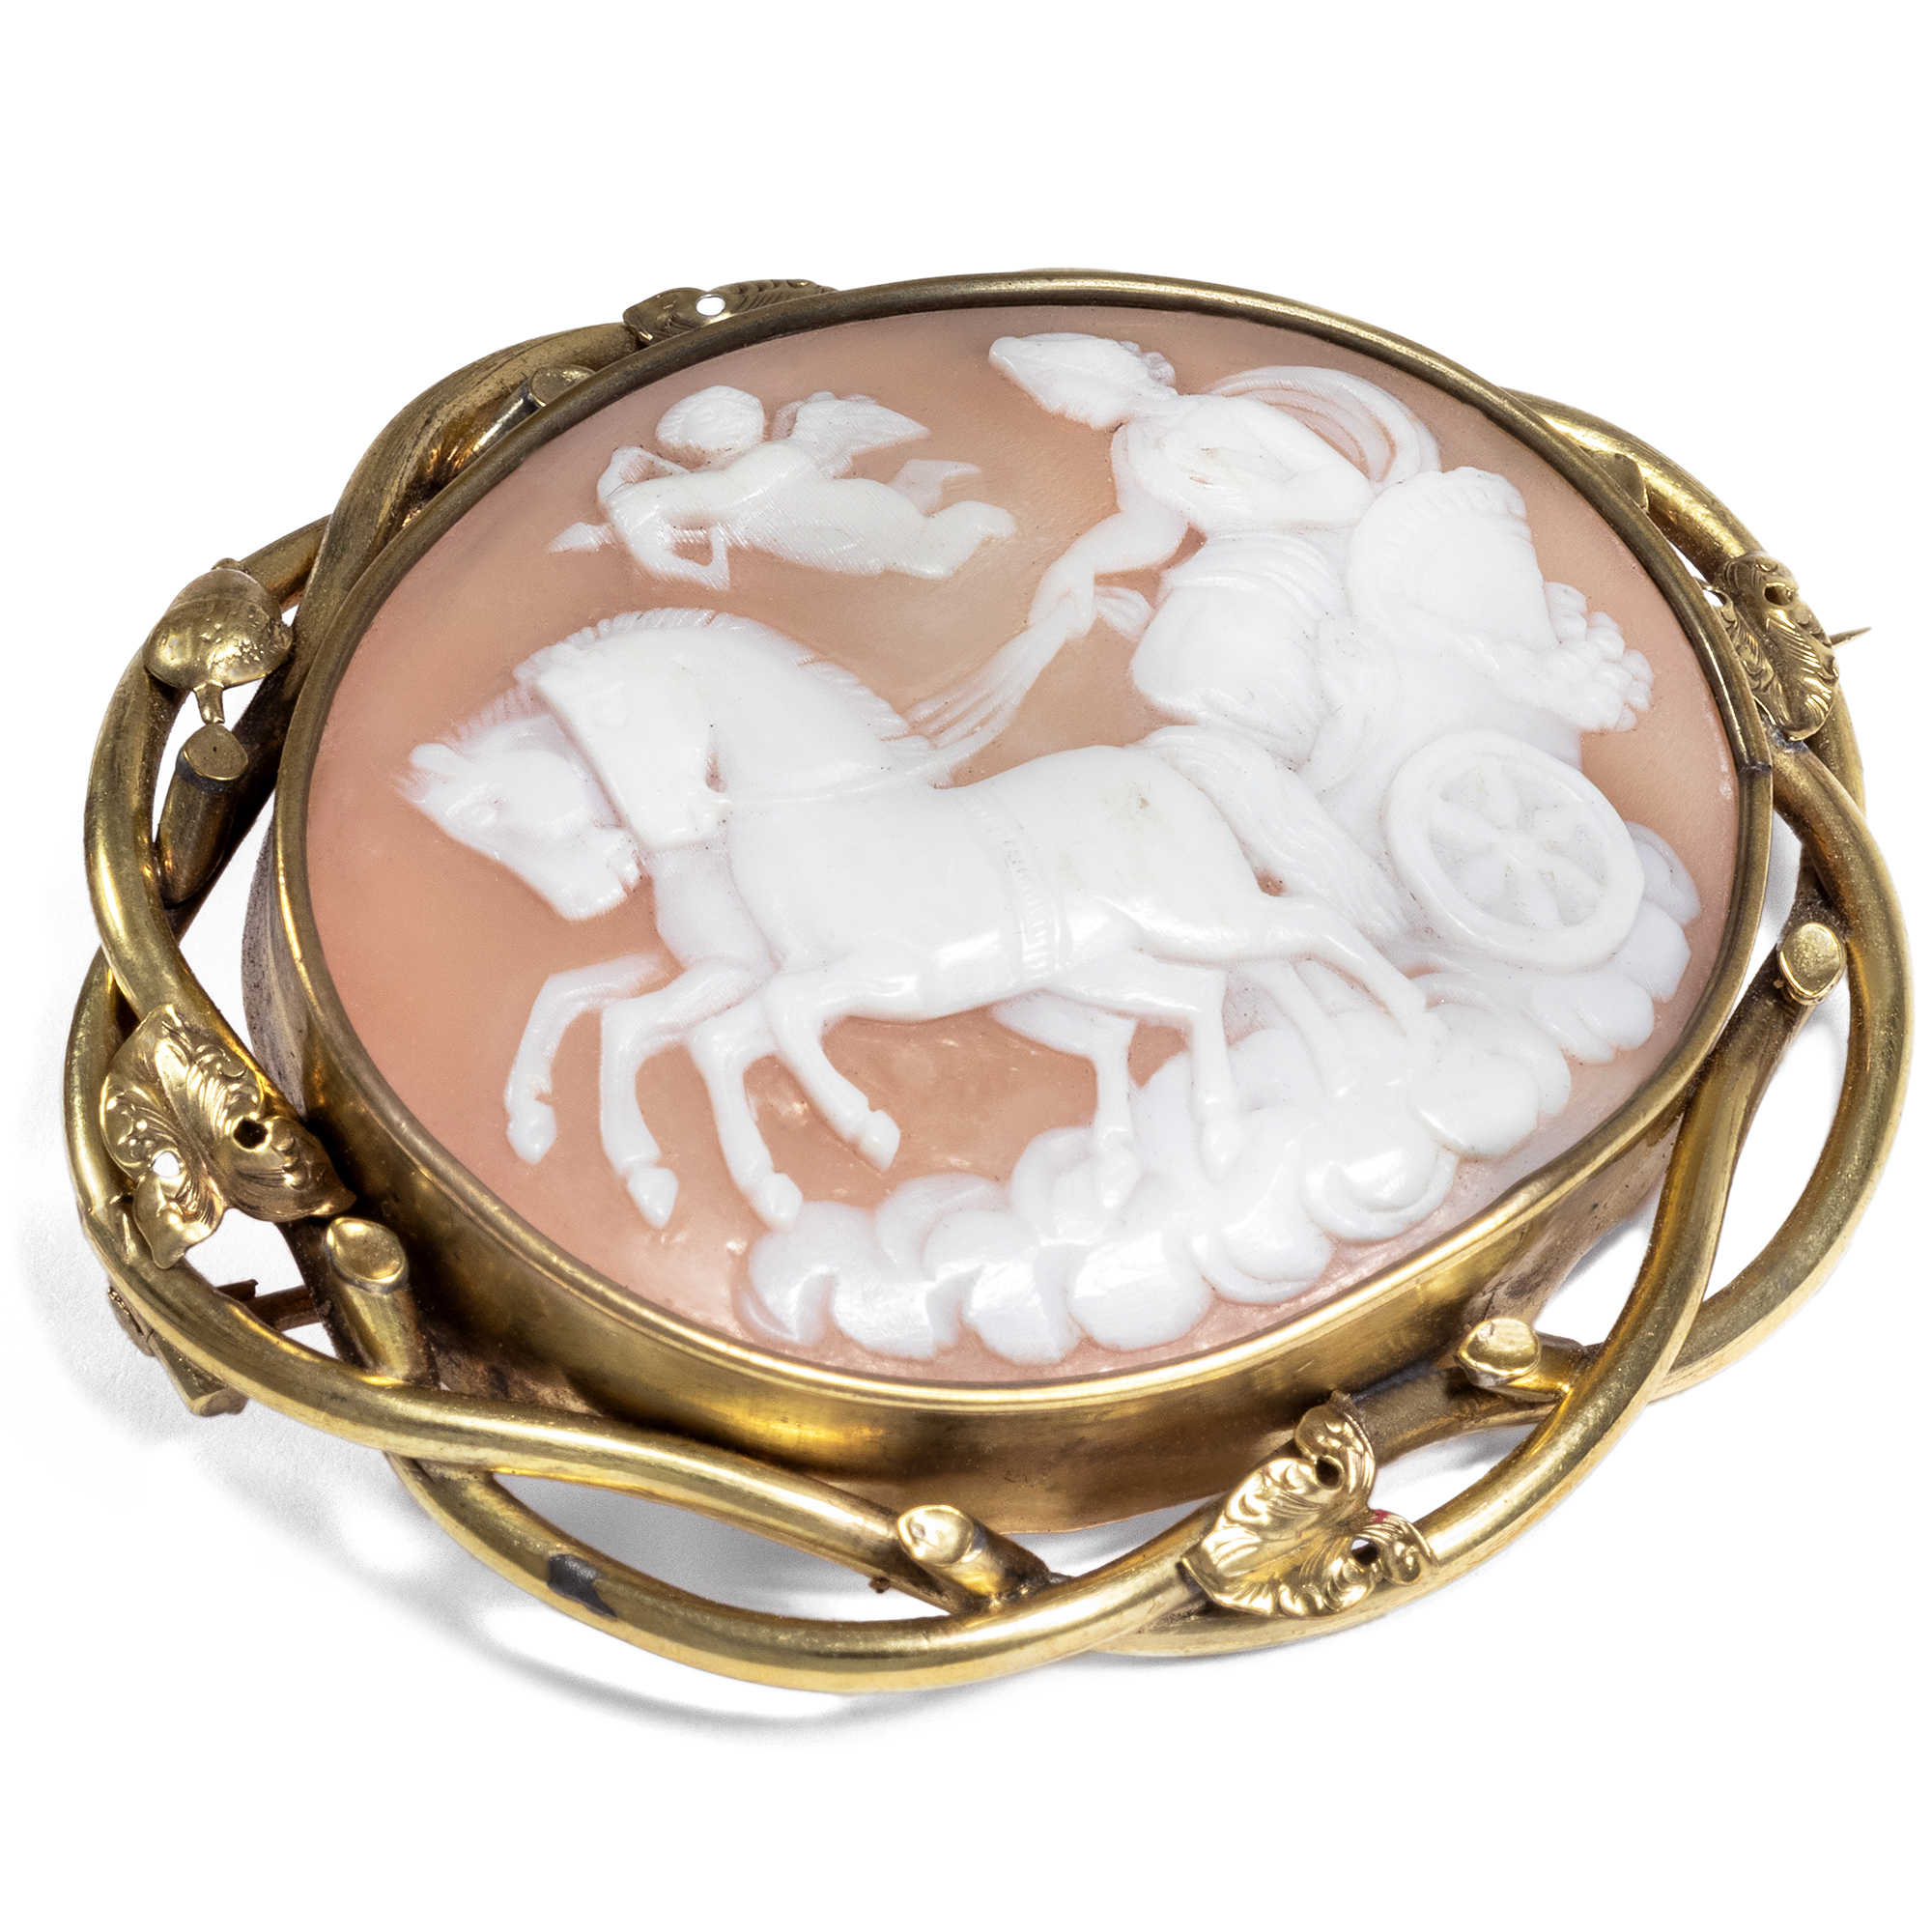 Antique Cameo of Venus and Cupid, Italy & England c. 1850